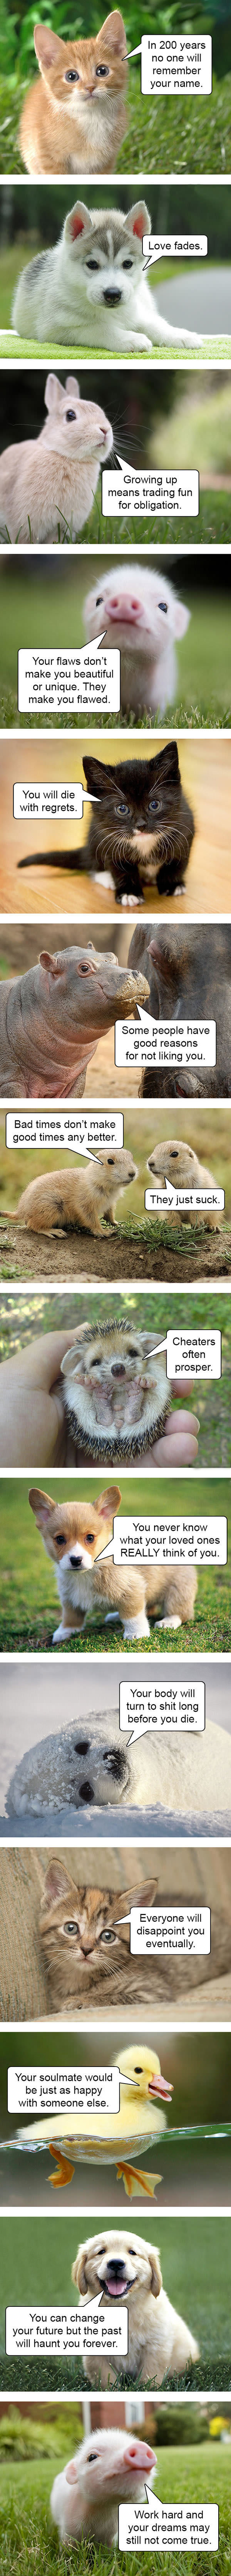 Hard Truths From Baby Animals